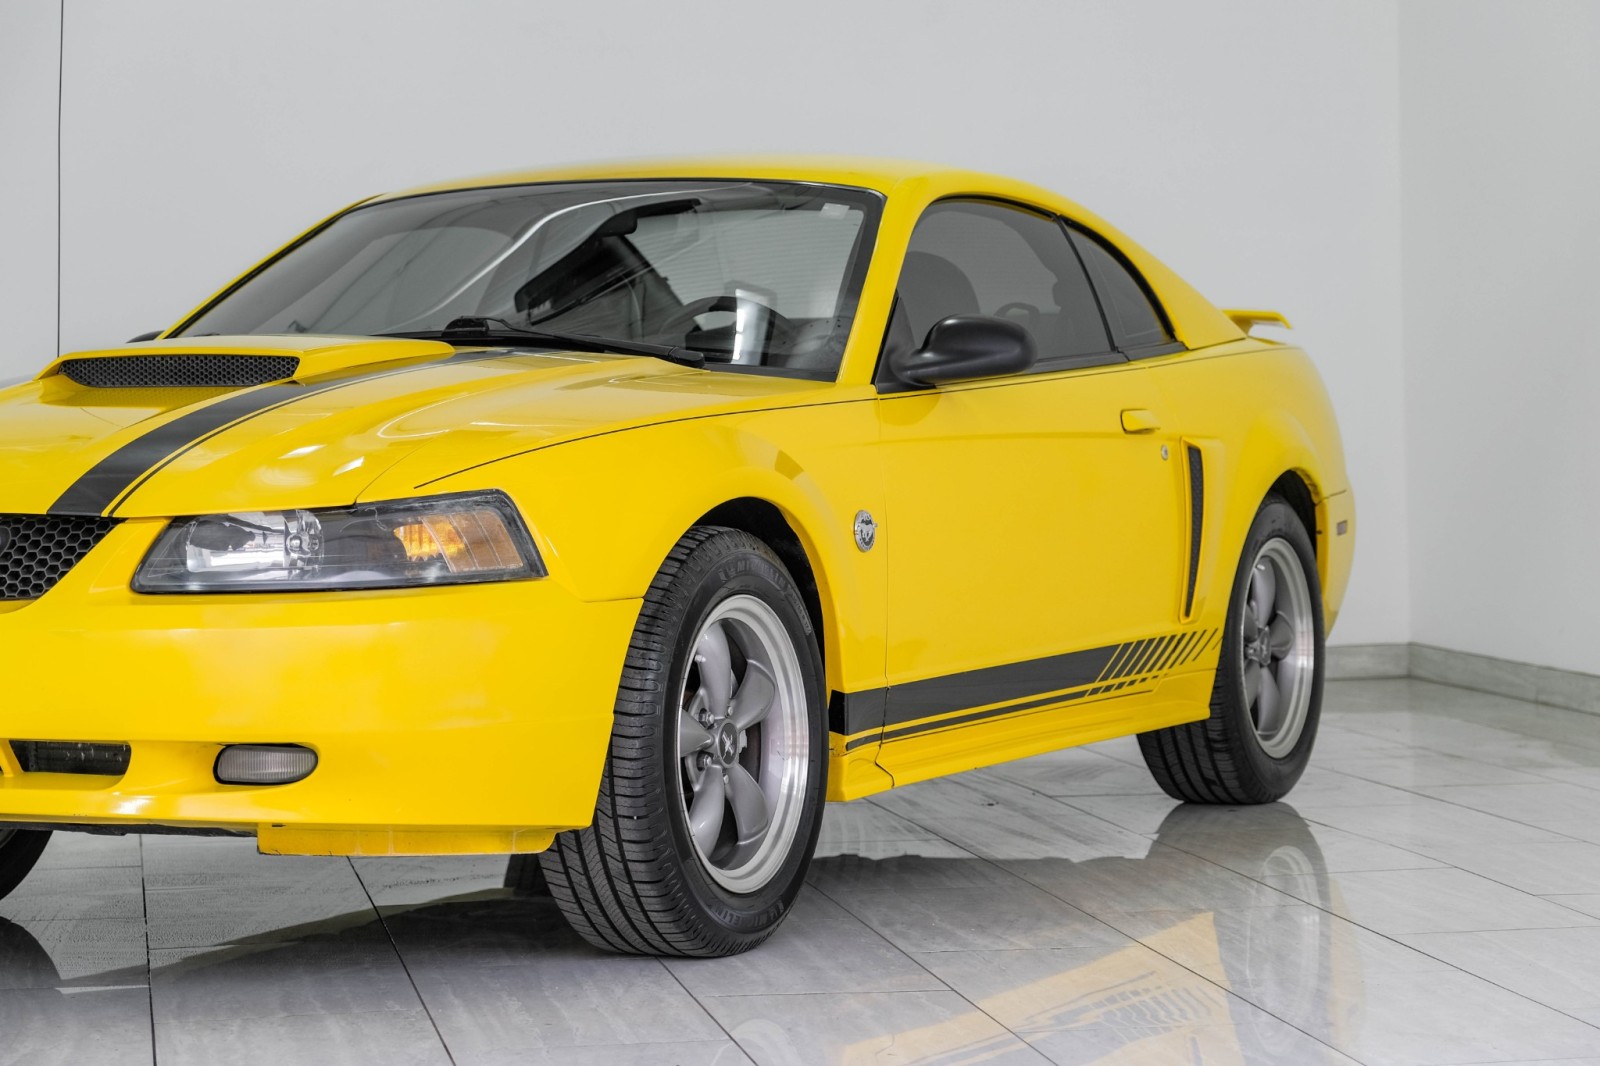 2004 Ford Mustang GT DELUXE LEATHER SEATS MACH AUDIO SYSTEM CRUISE C 10